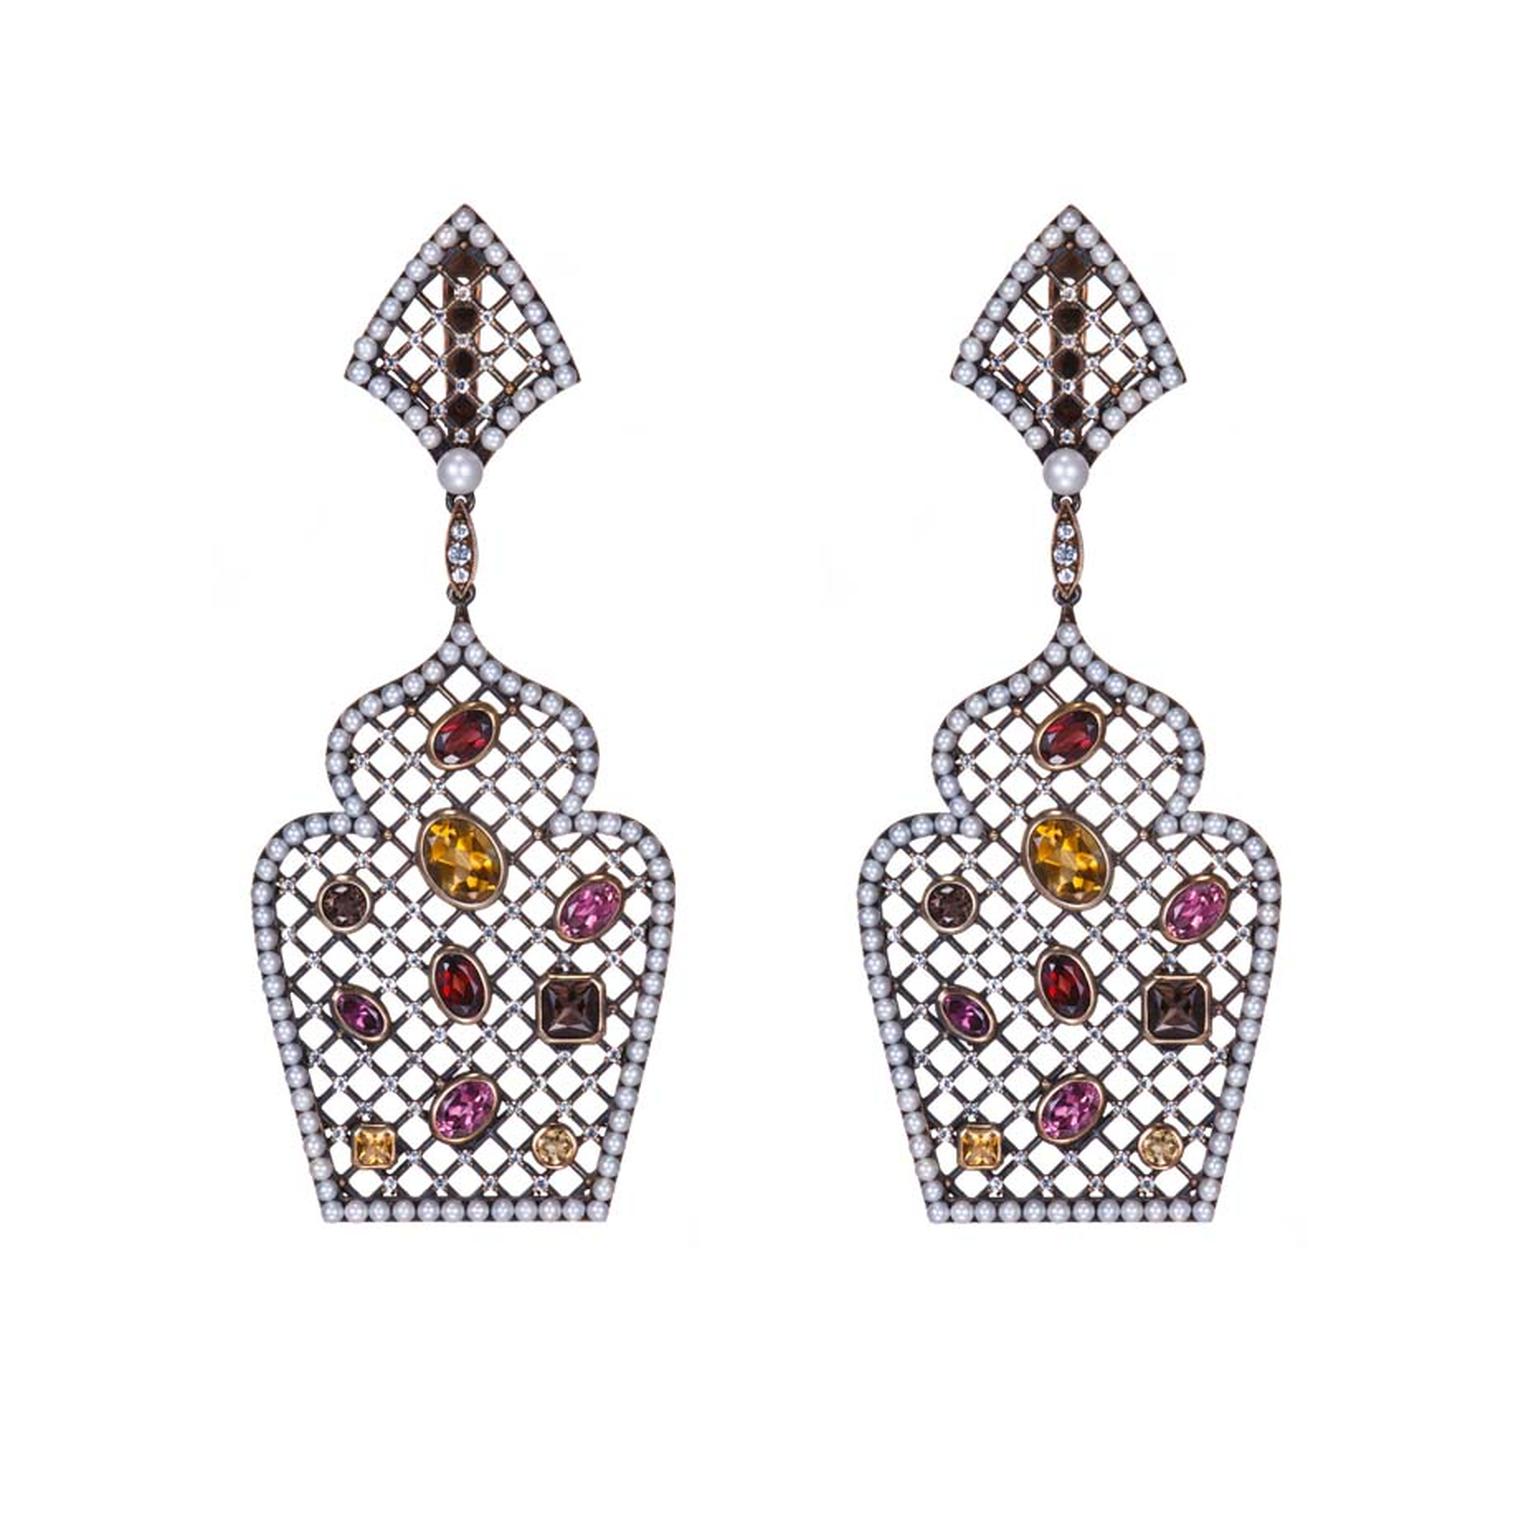 Petr Axenoff silver Radmila earrings with pearls, citrine, garnets, sapphires and amethysts